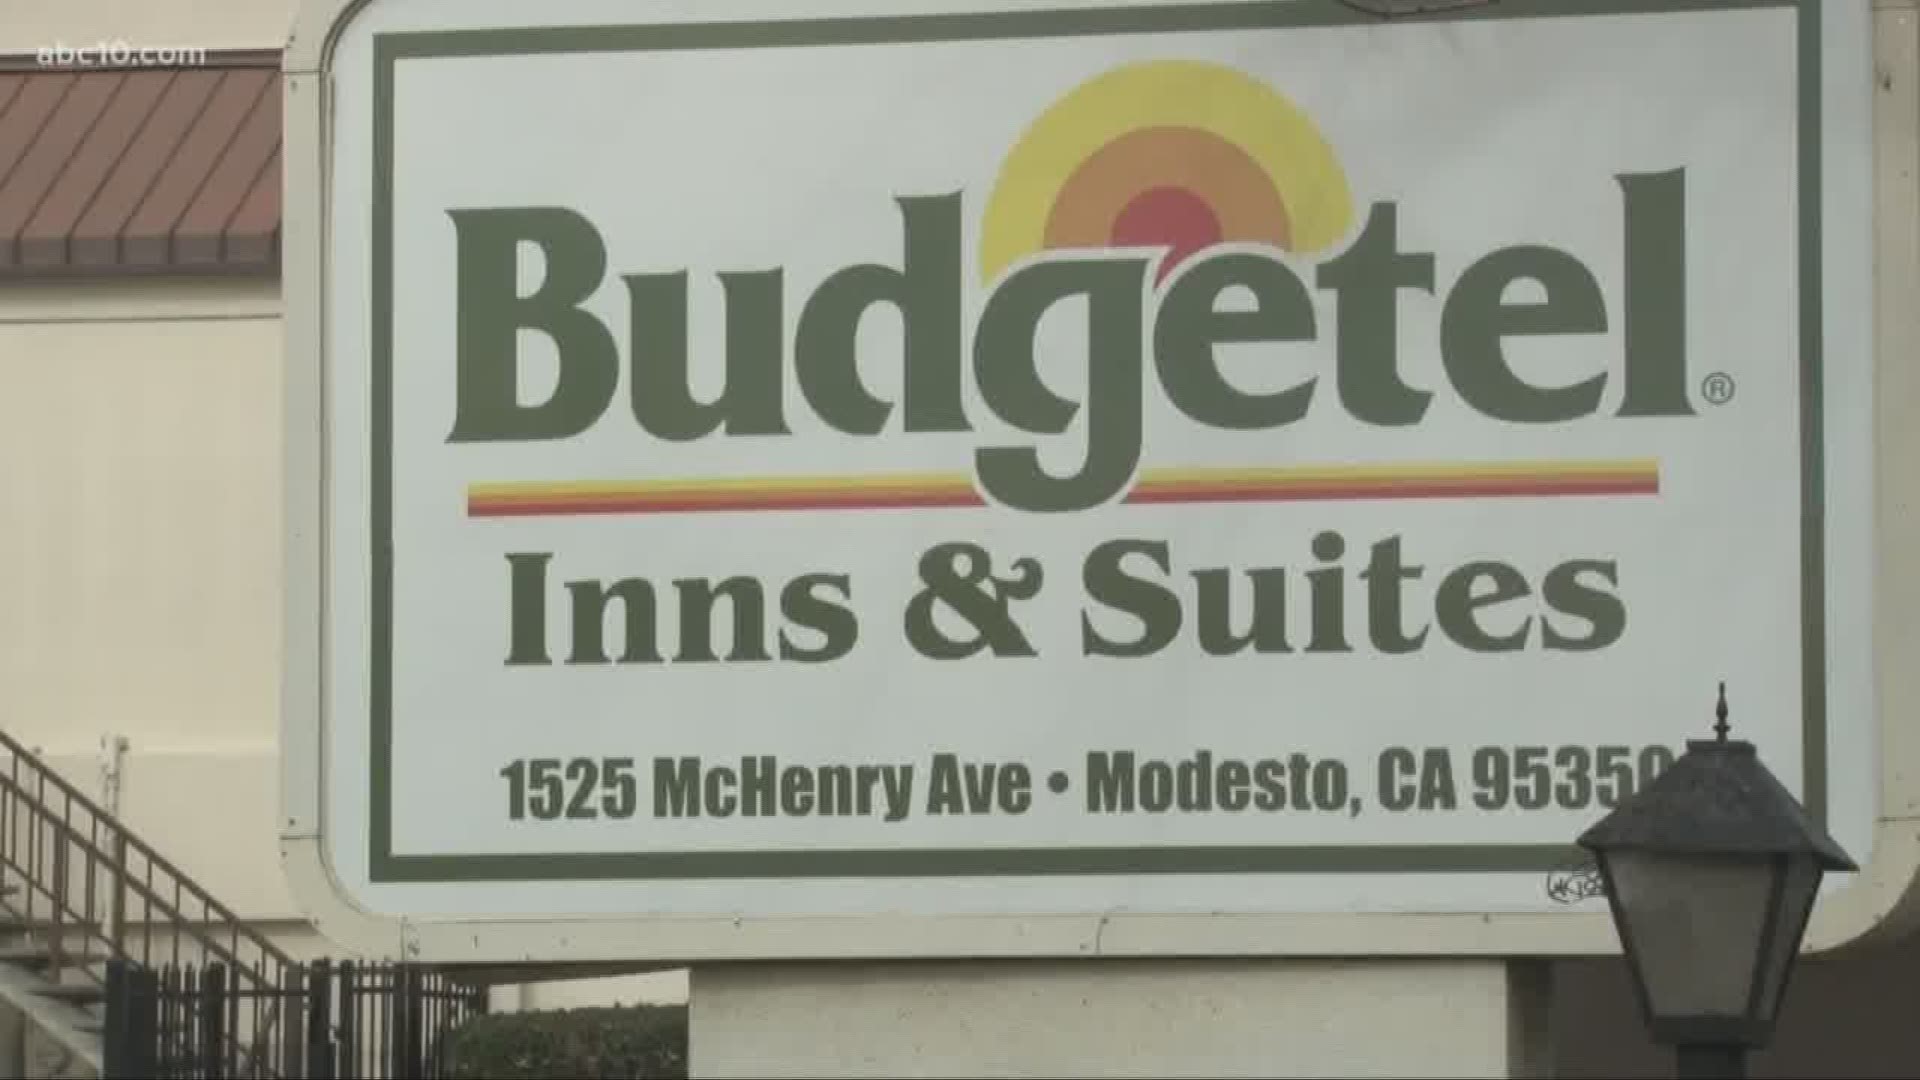 On Saturday, more than a hundred residents, including more than two dozen kids, were told to leave the Budgetel Inn and Suites in Modesto.